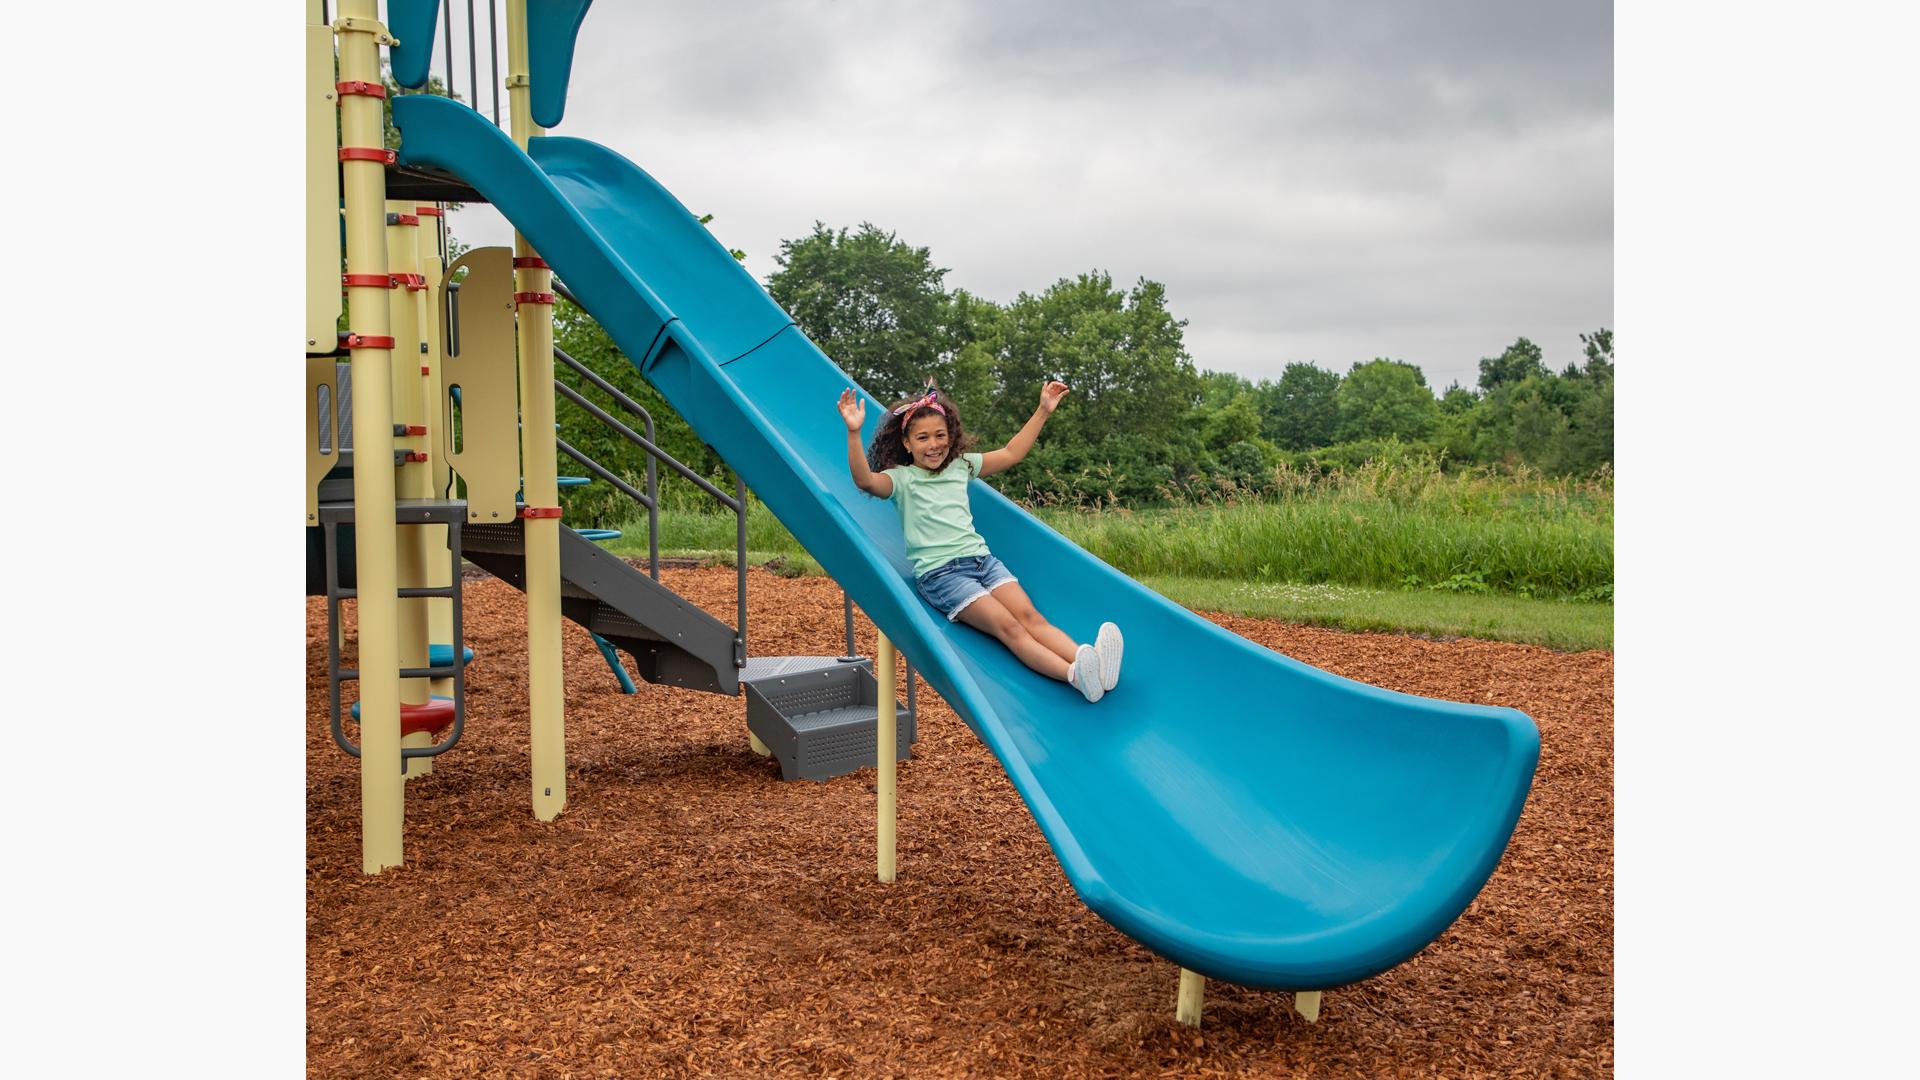 A girl puts her hands up on a playground as she descends a blue Alpine Slide.